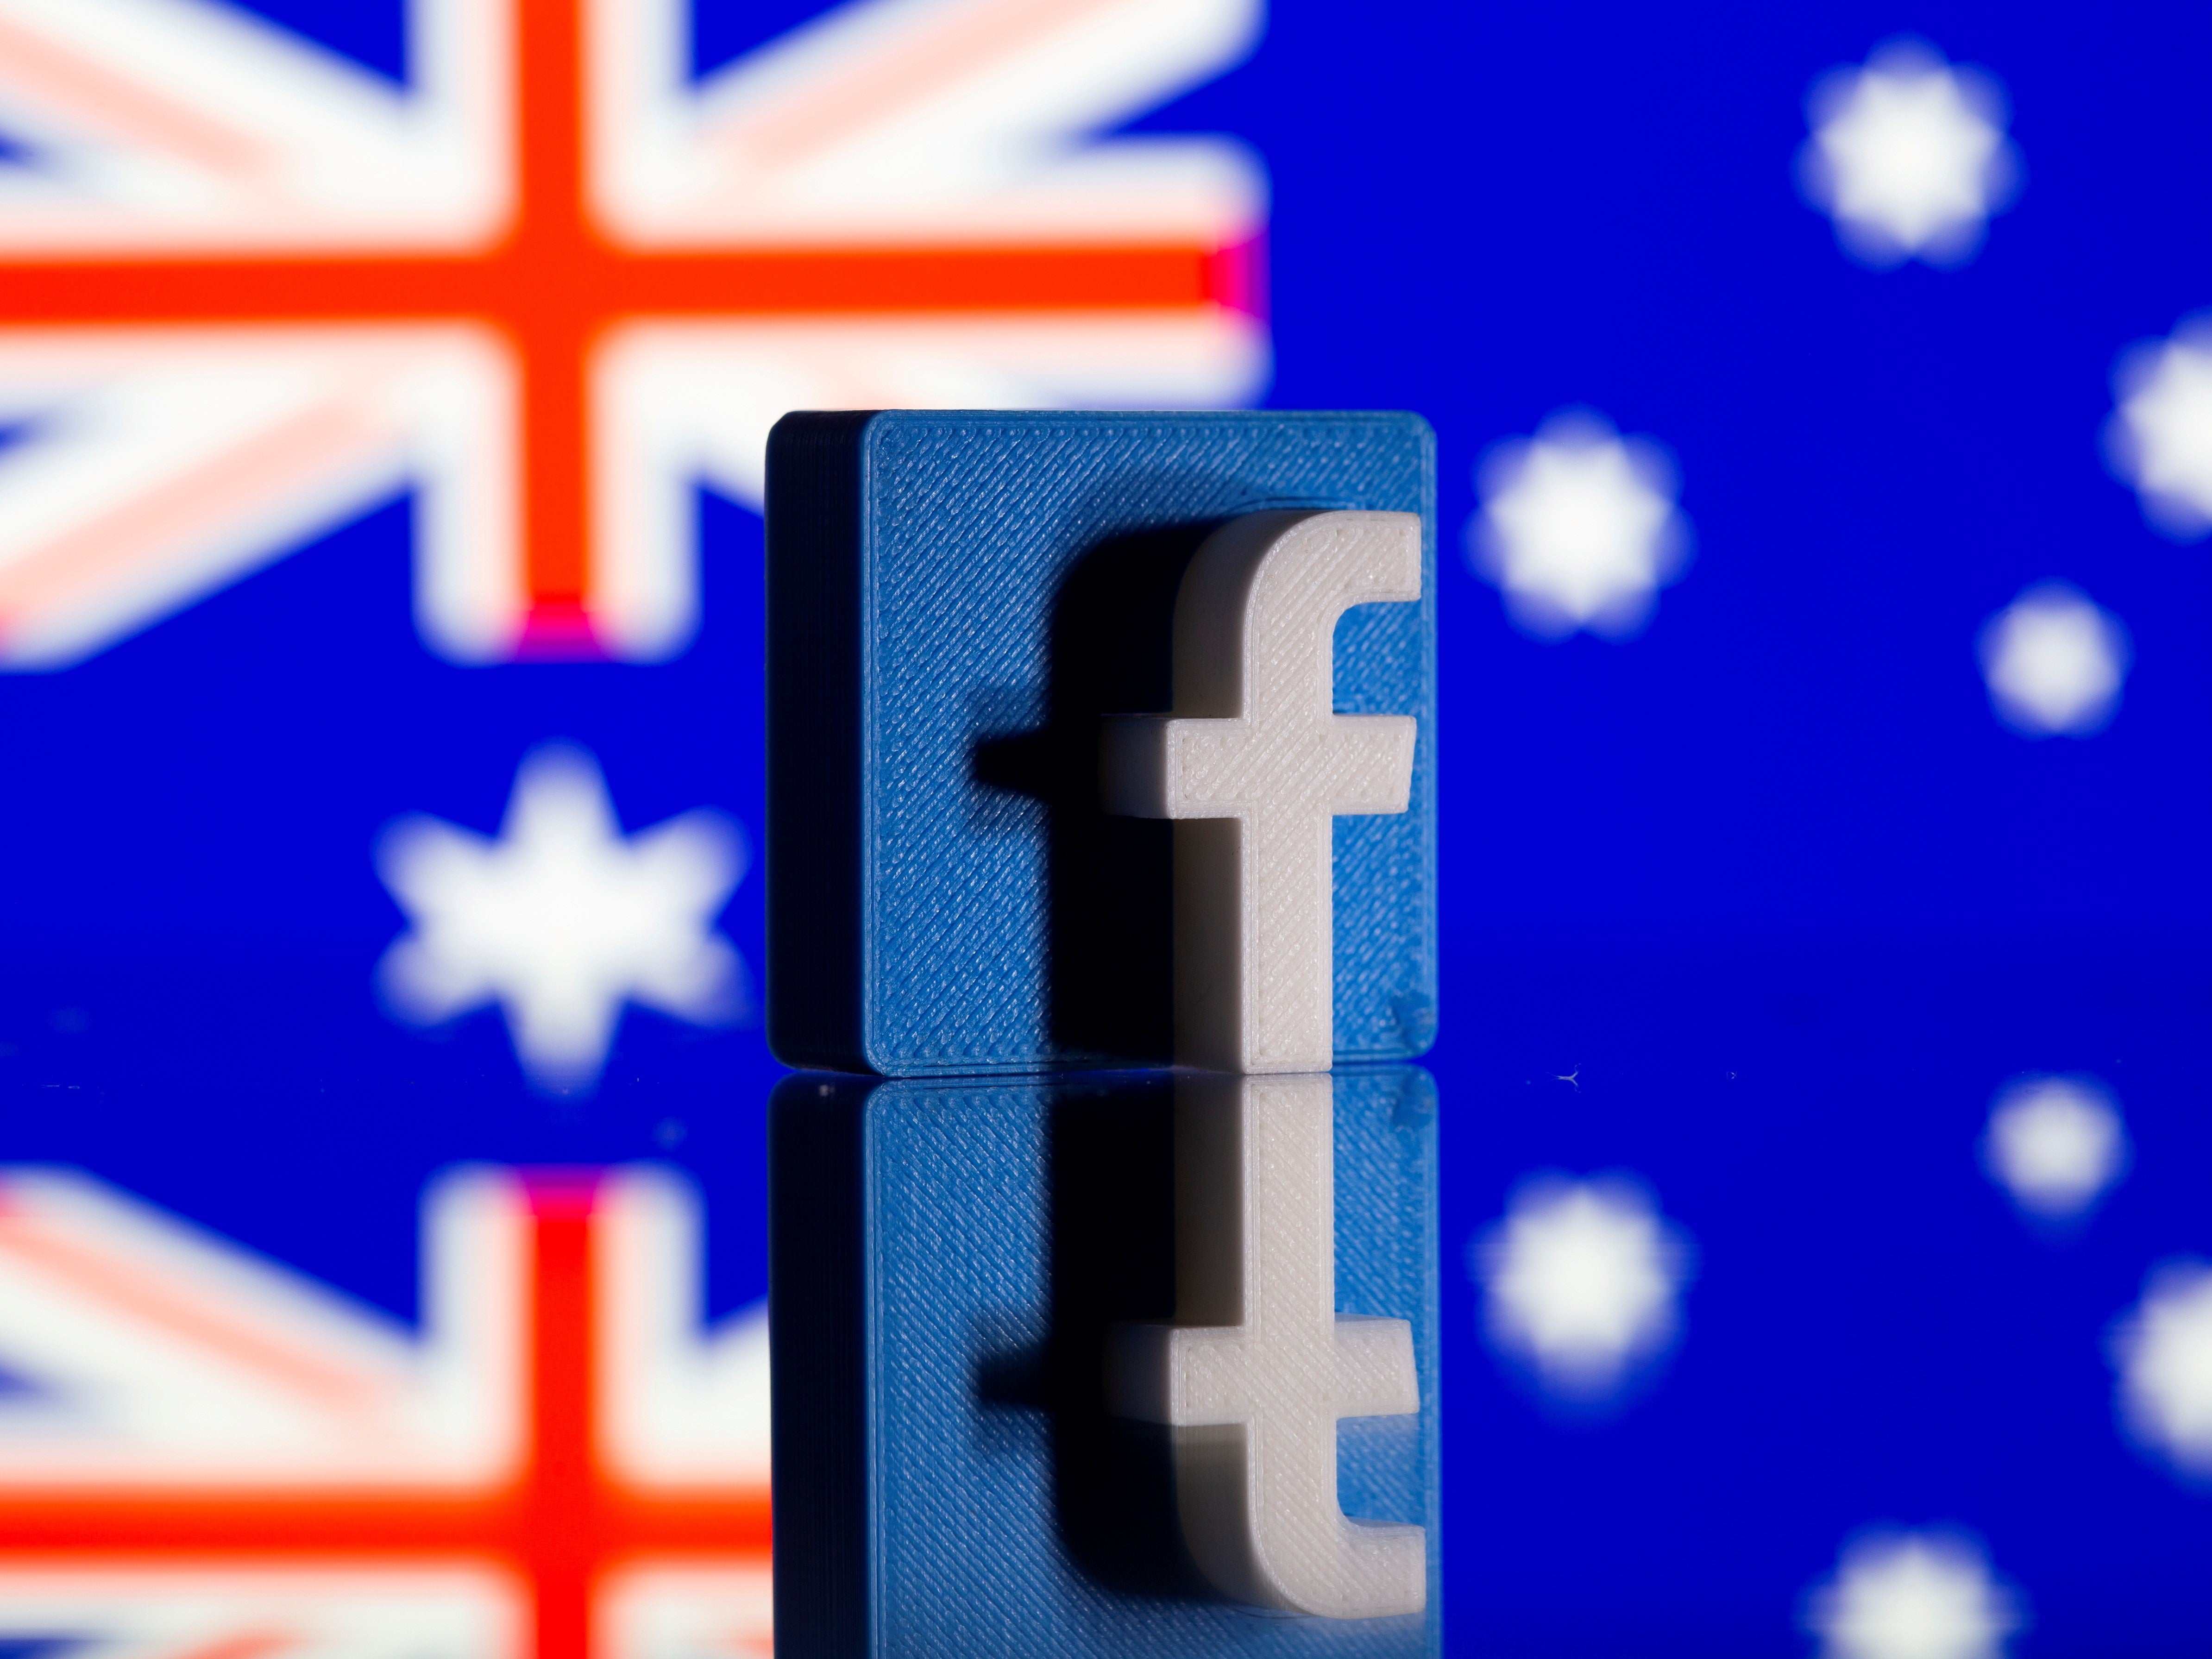 In order for Facebook to back down, Australia agreed to certain changes to the original legislation